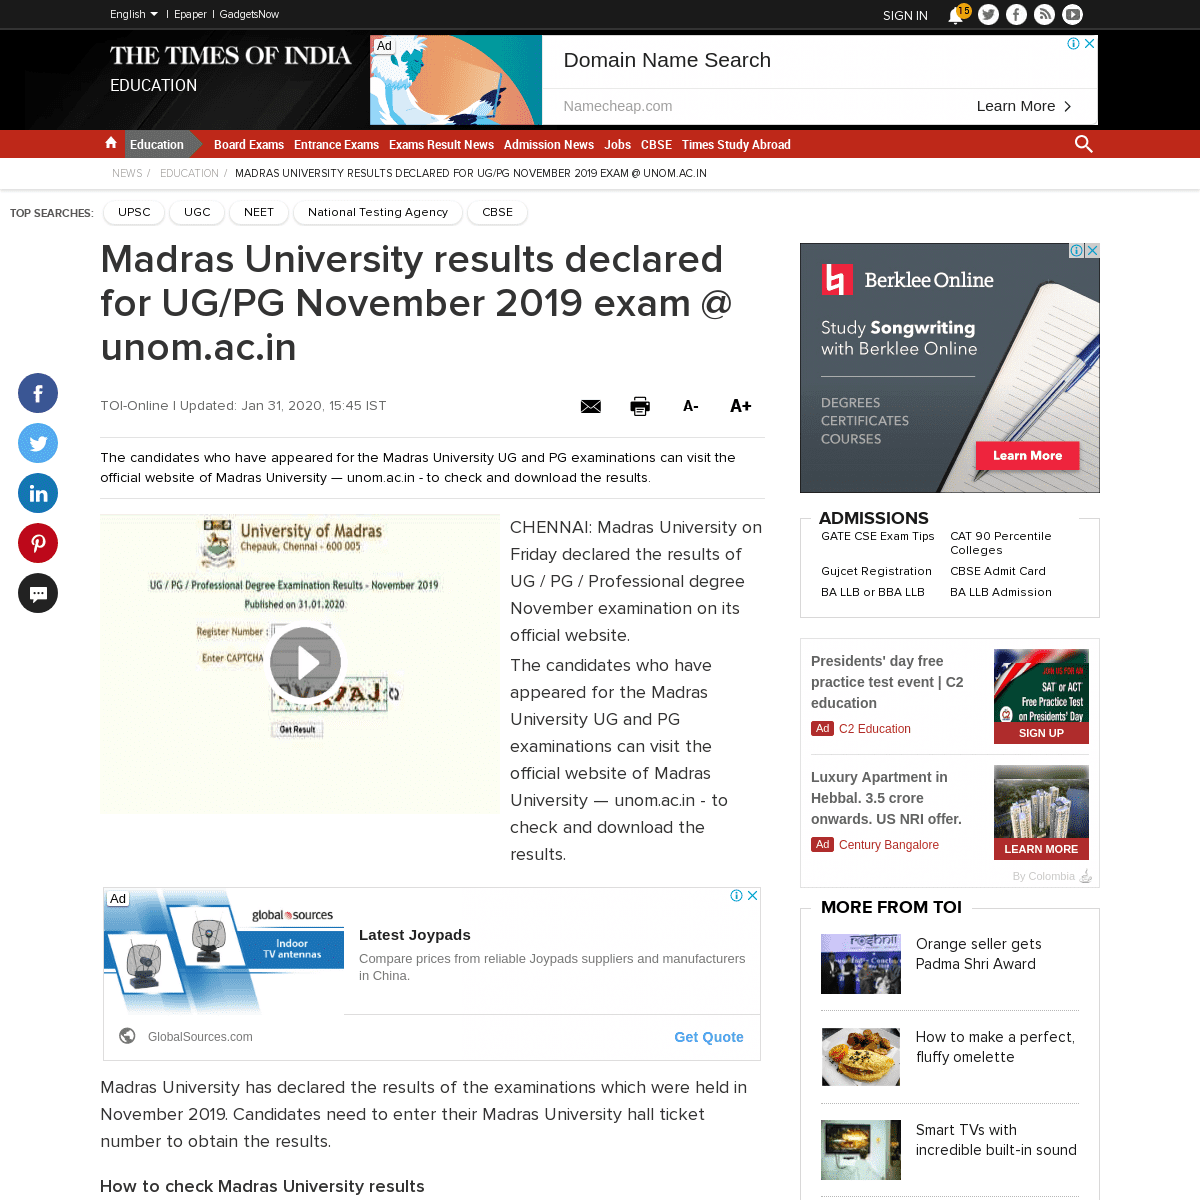 A complete backup of timesofindia.indiatimes.com/home/education/news/madras-university-results-announced-for-ug/pg-november-2019